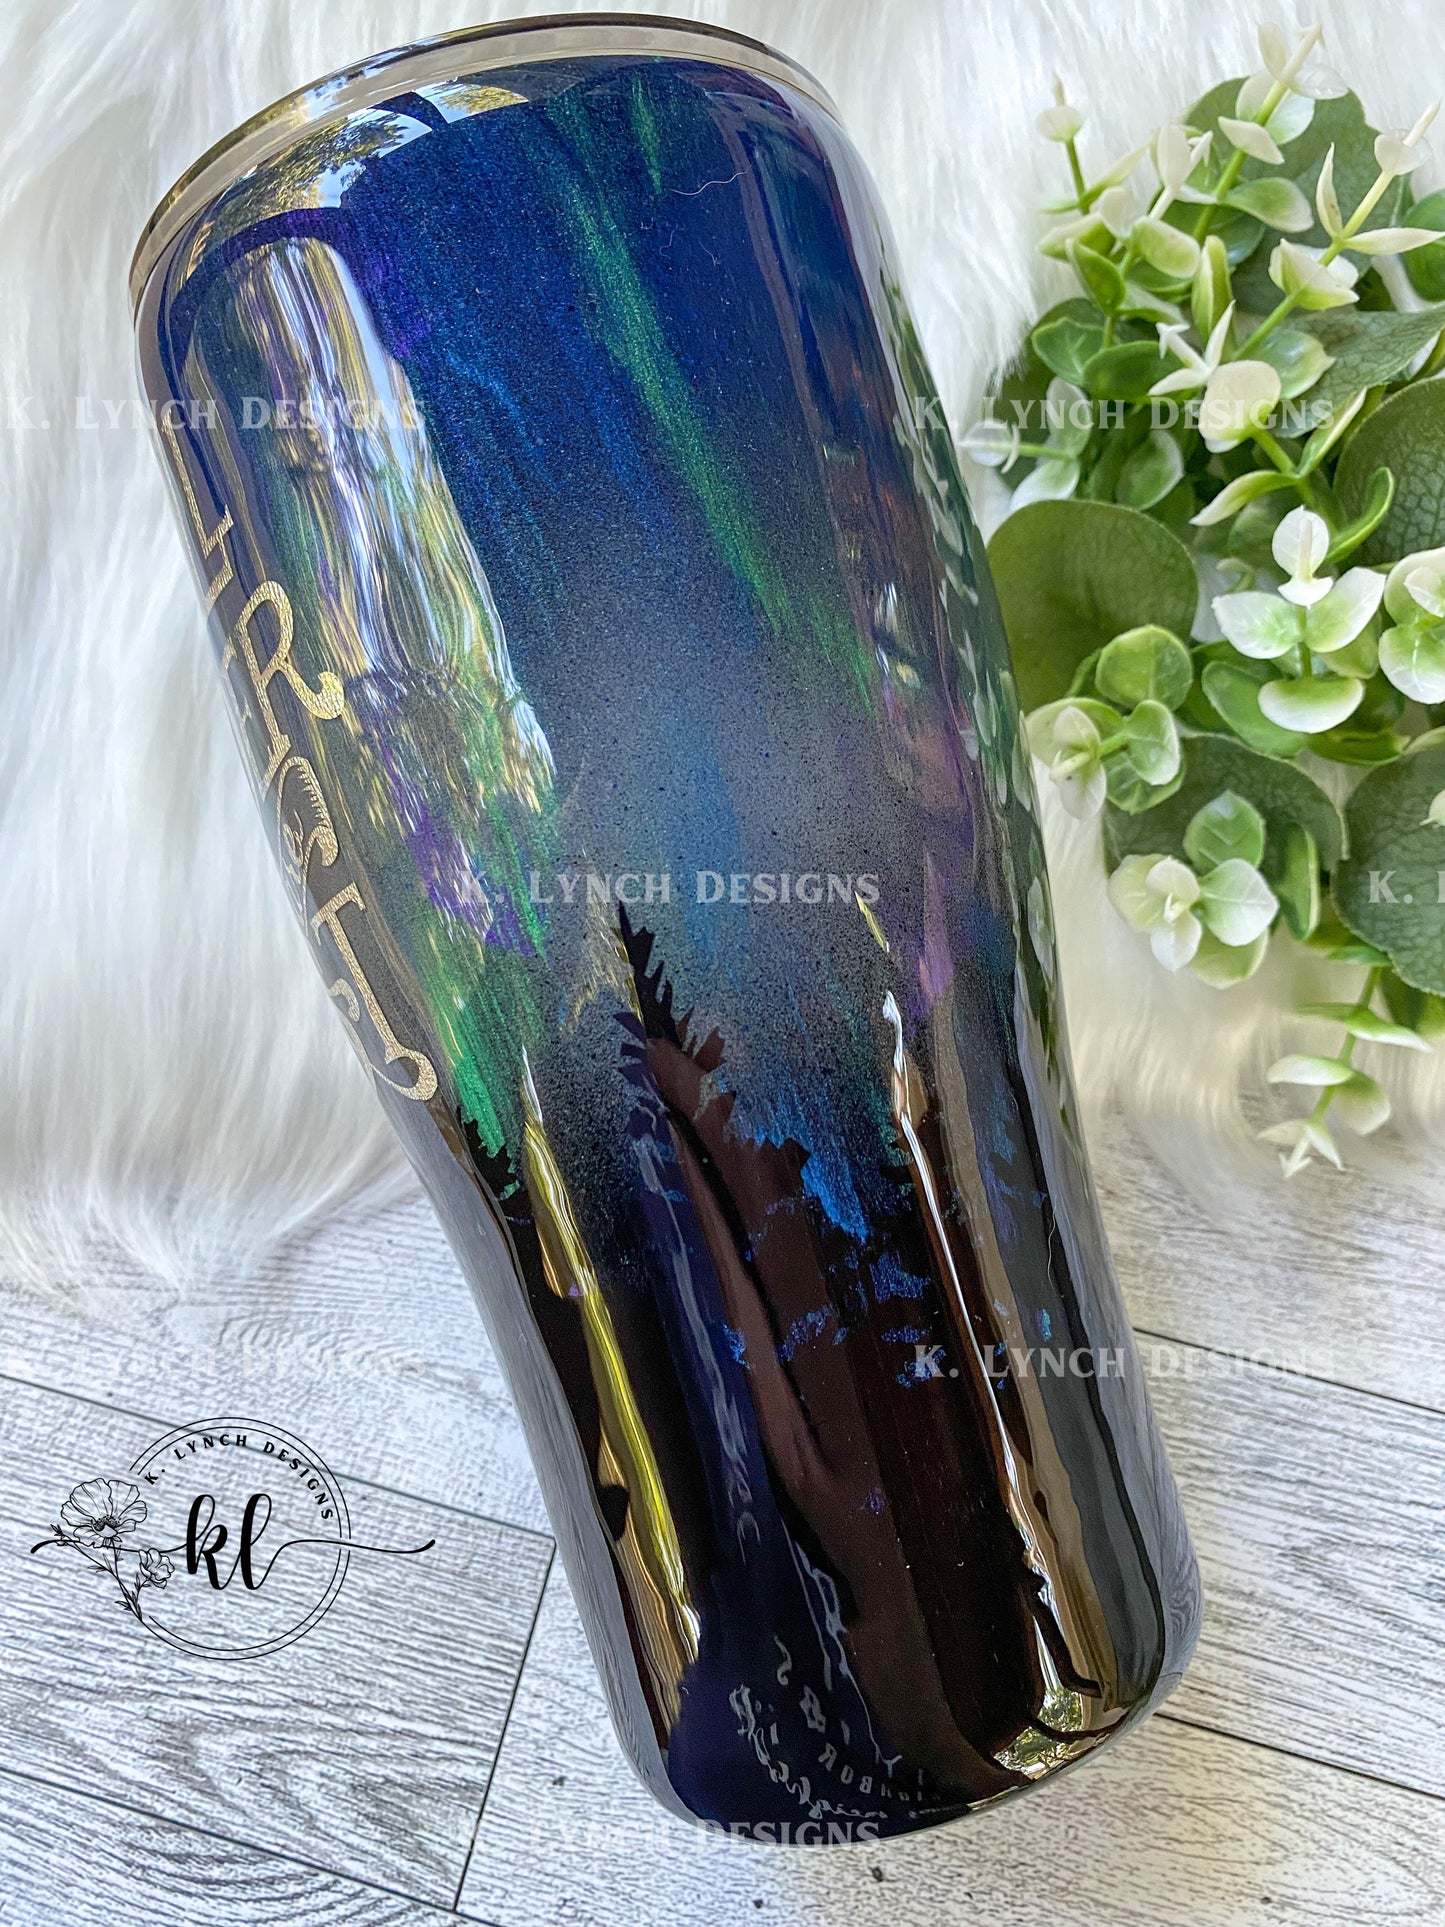 30 oz. "Not All Who Wander Are Lost" Northern Lights Tumbler